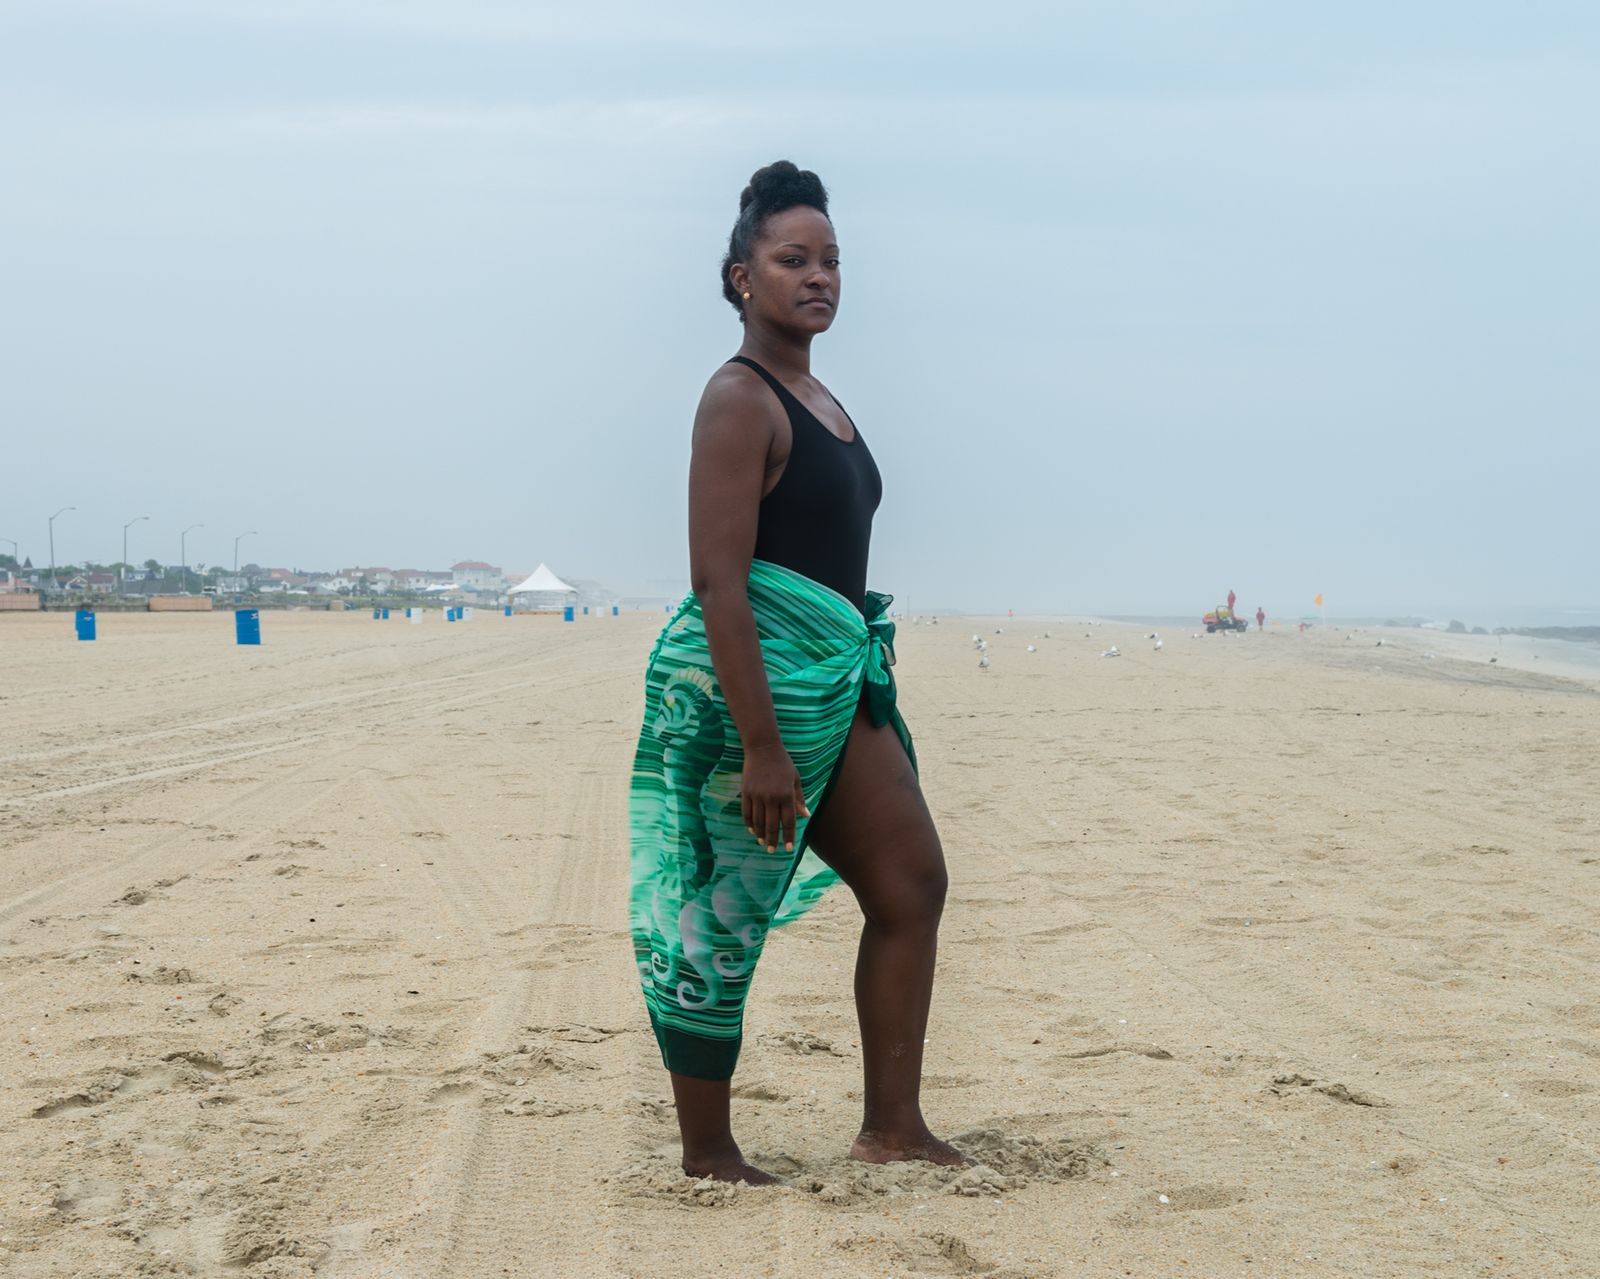 © Martin Toft - Tamika Tolliver, Asbury Park, New Jersey, United States, 1 August 2014